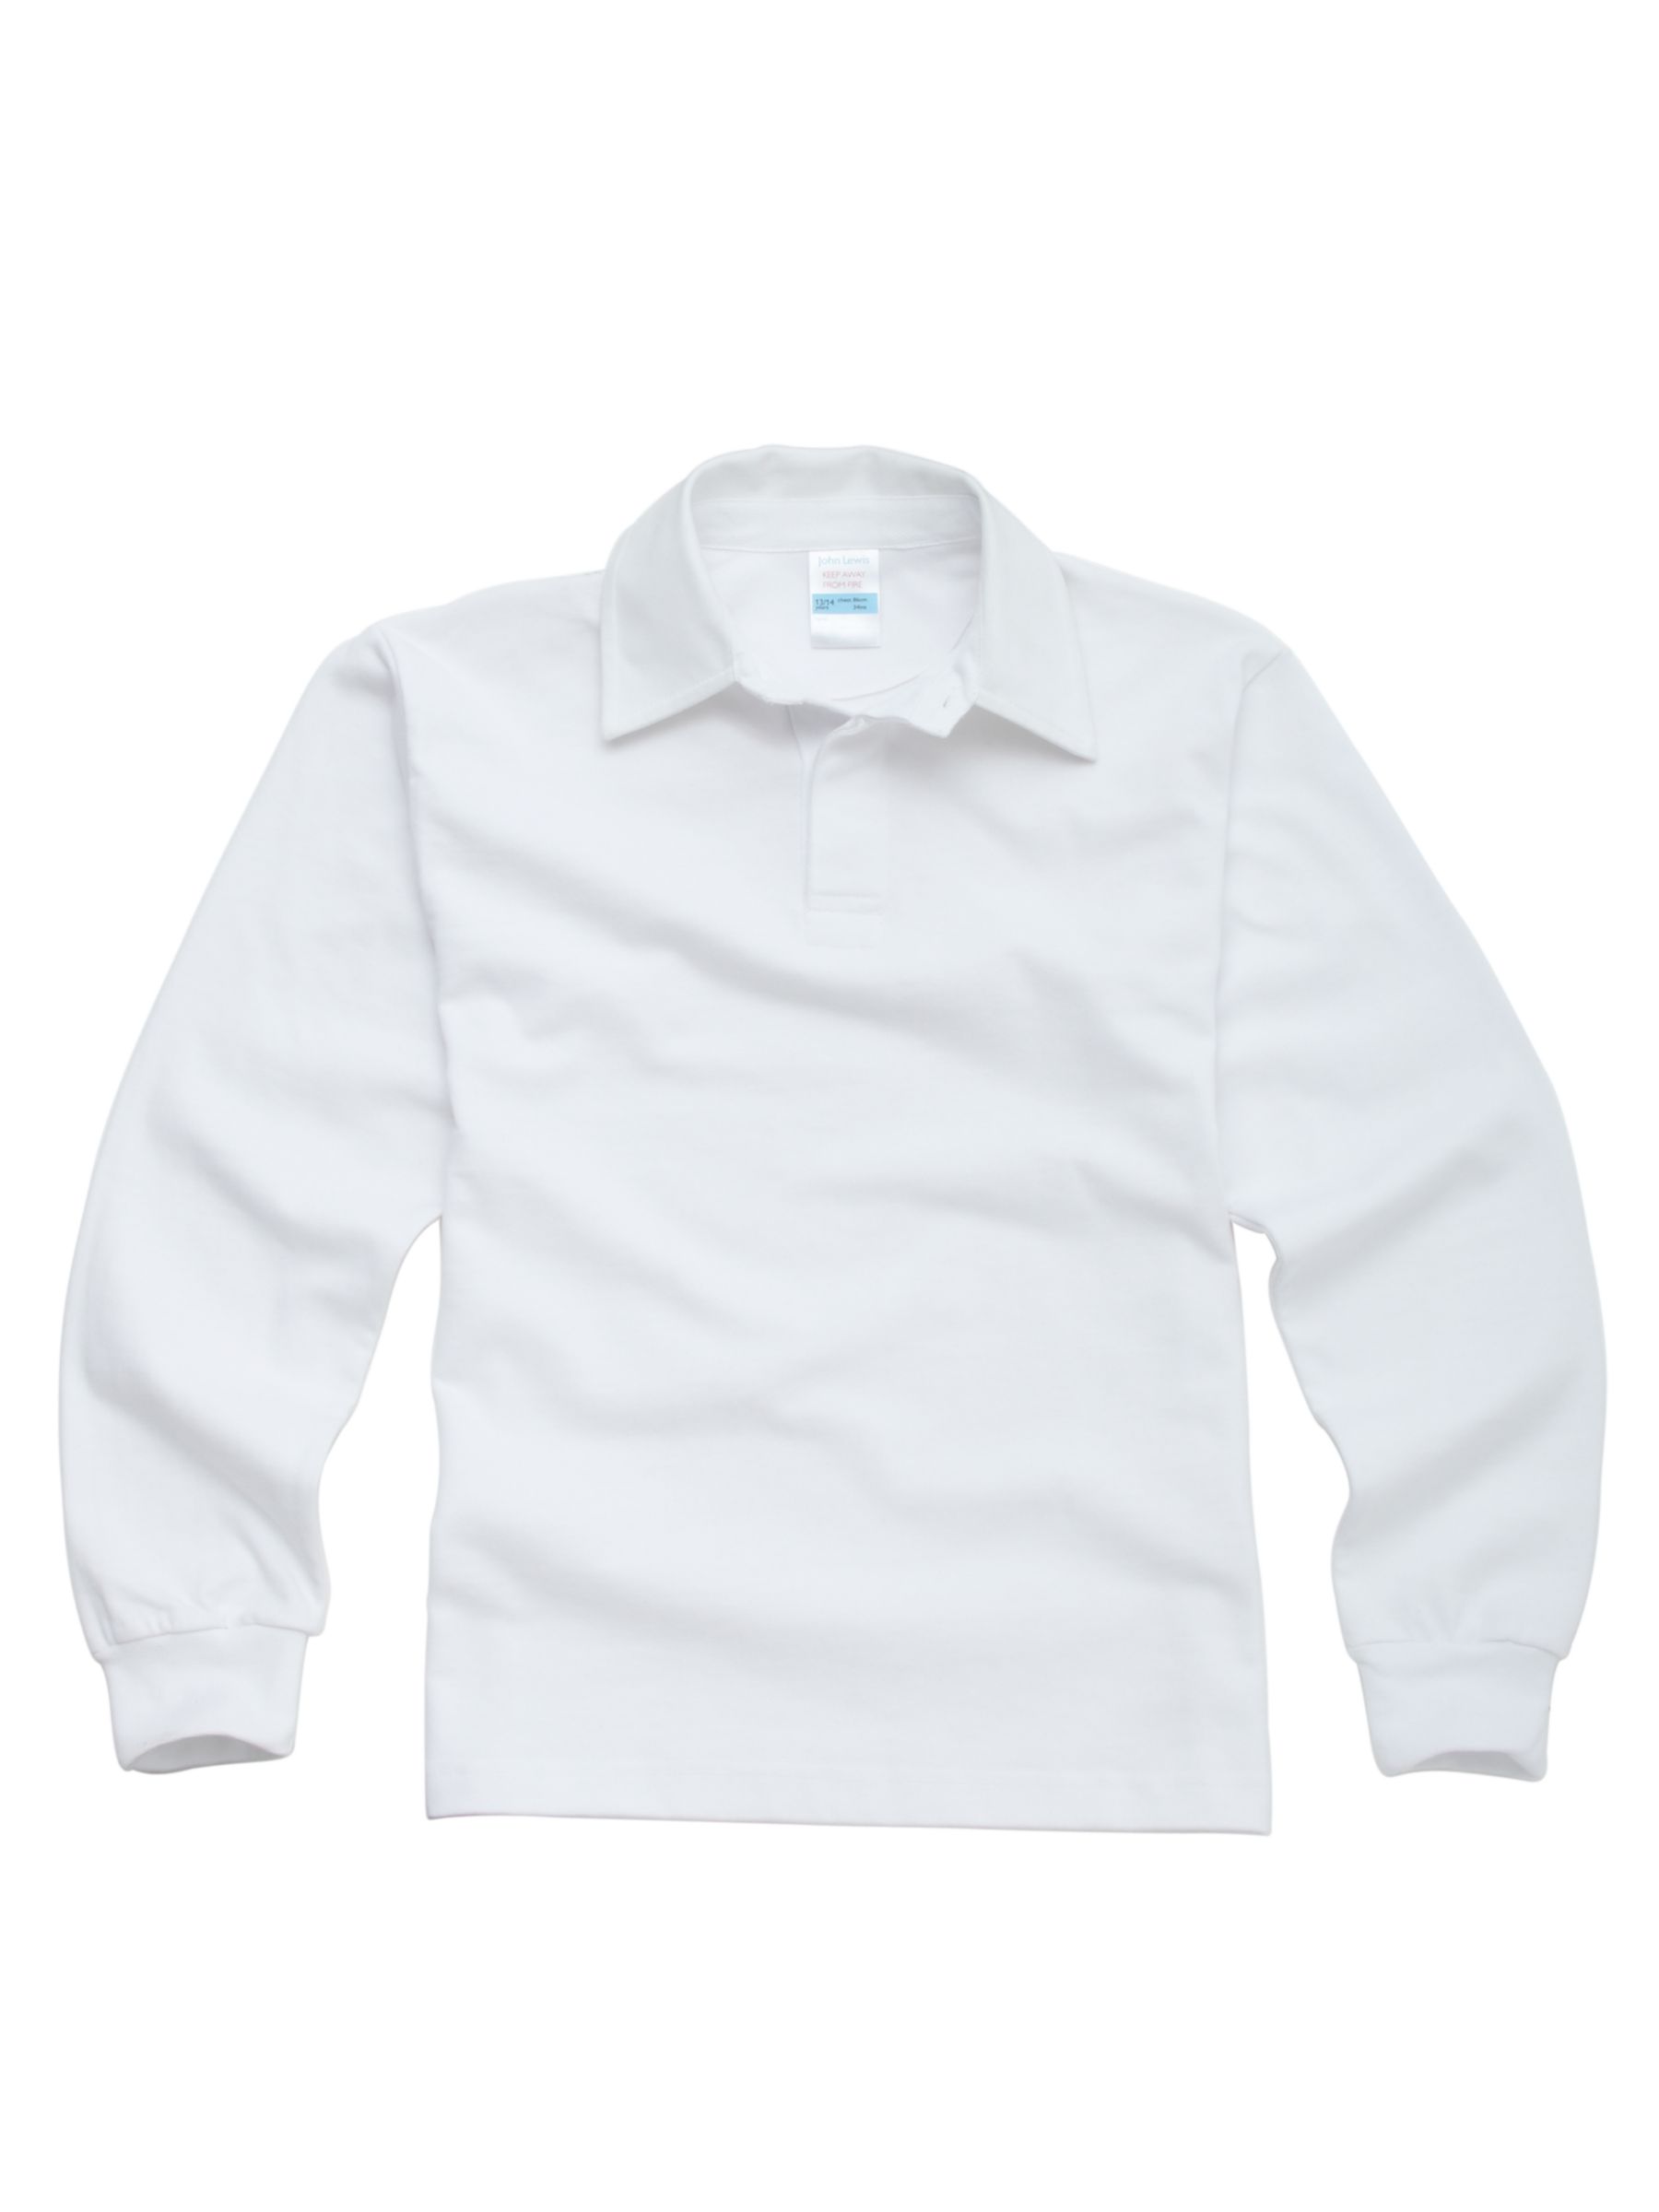 Other Schools School Boys Rugby Shirt, White